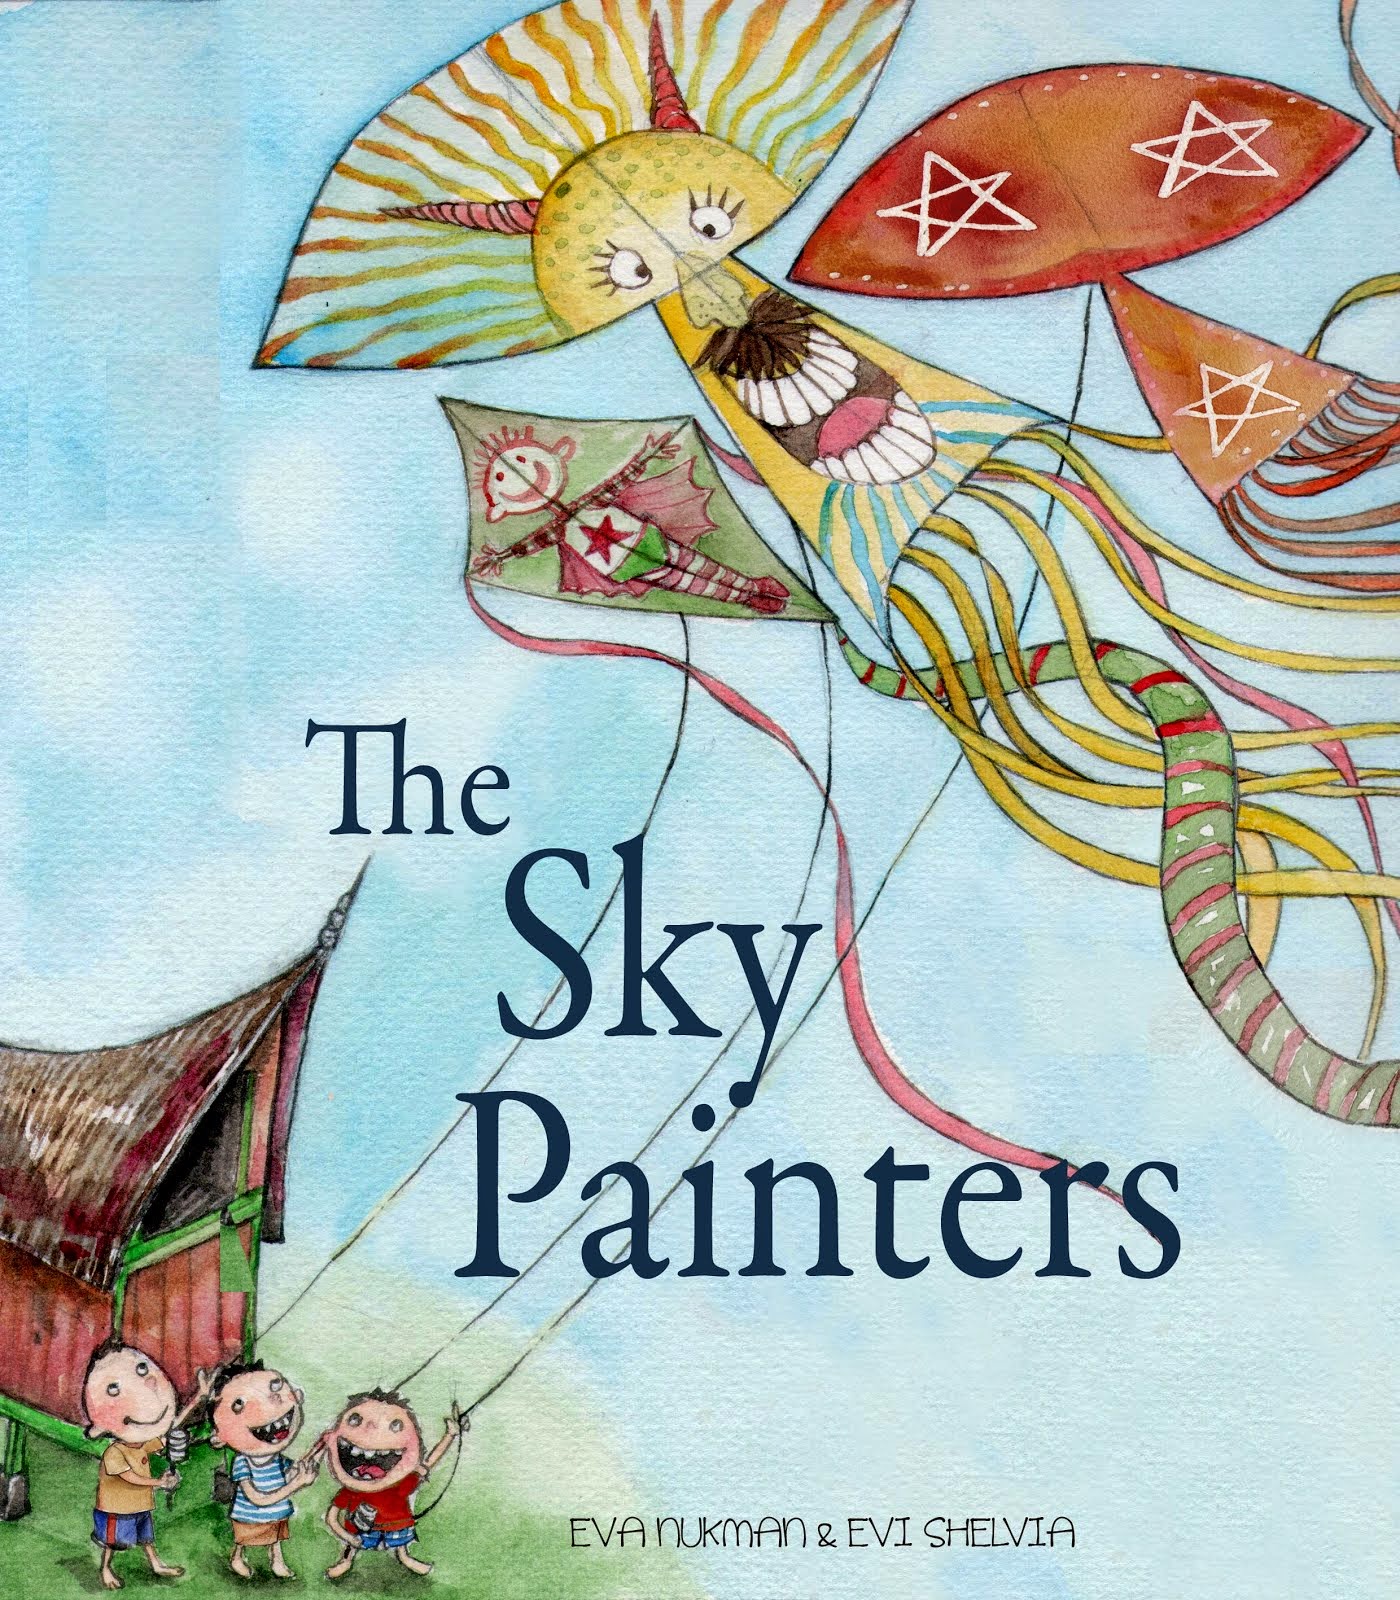 The Sky Painters